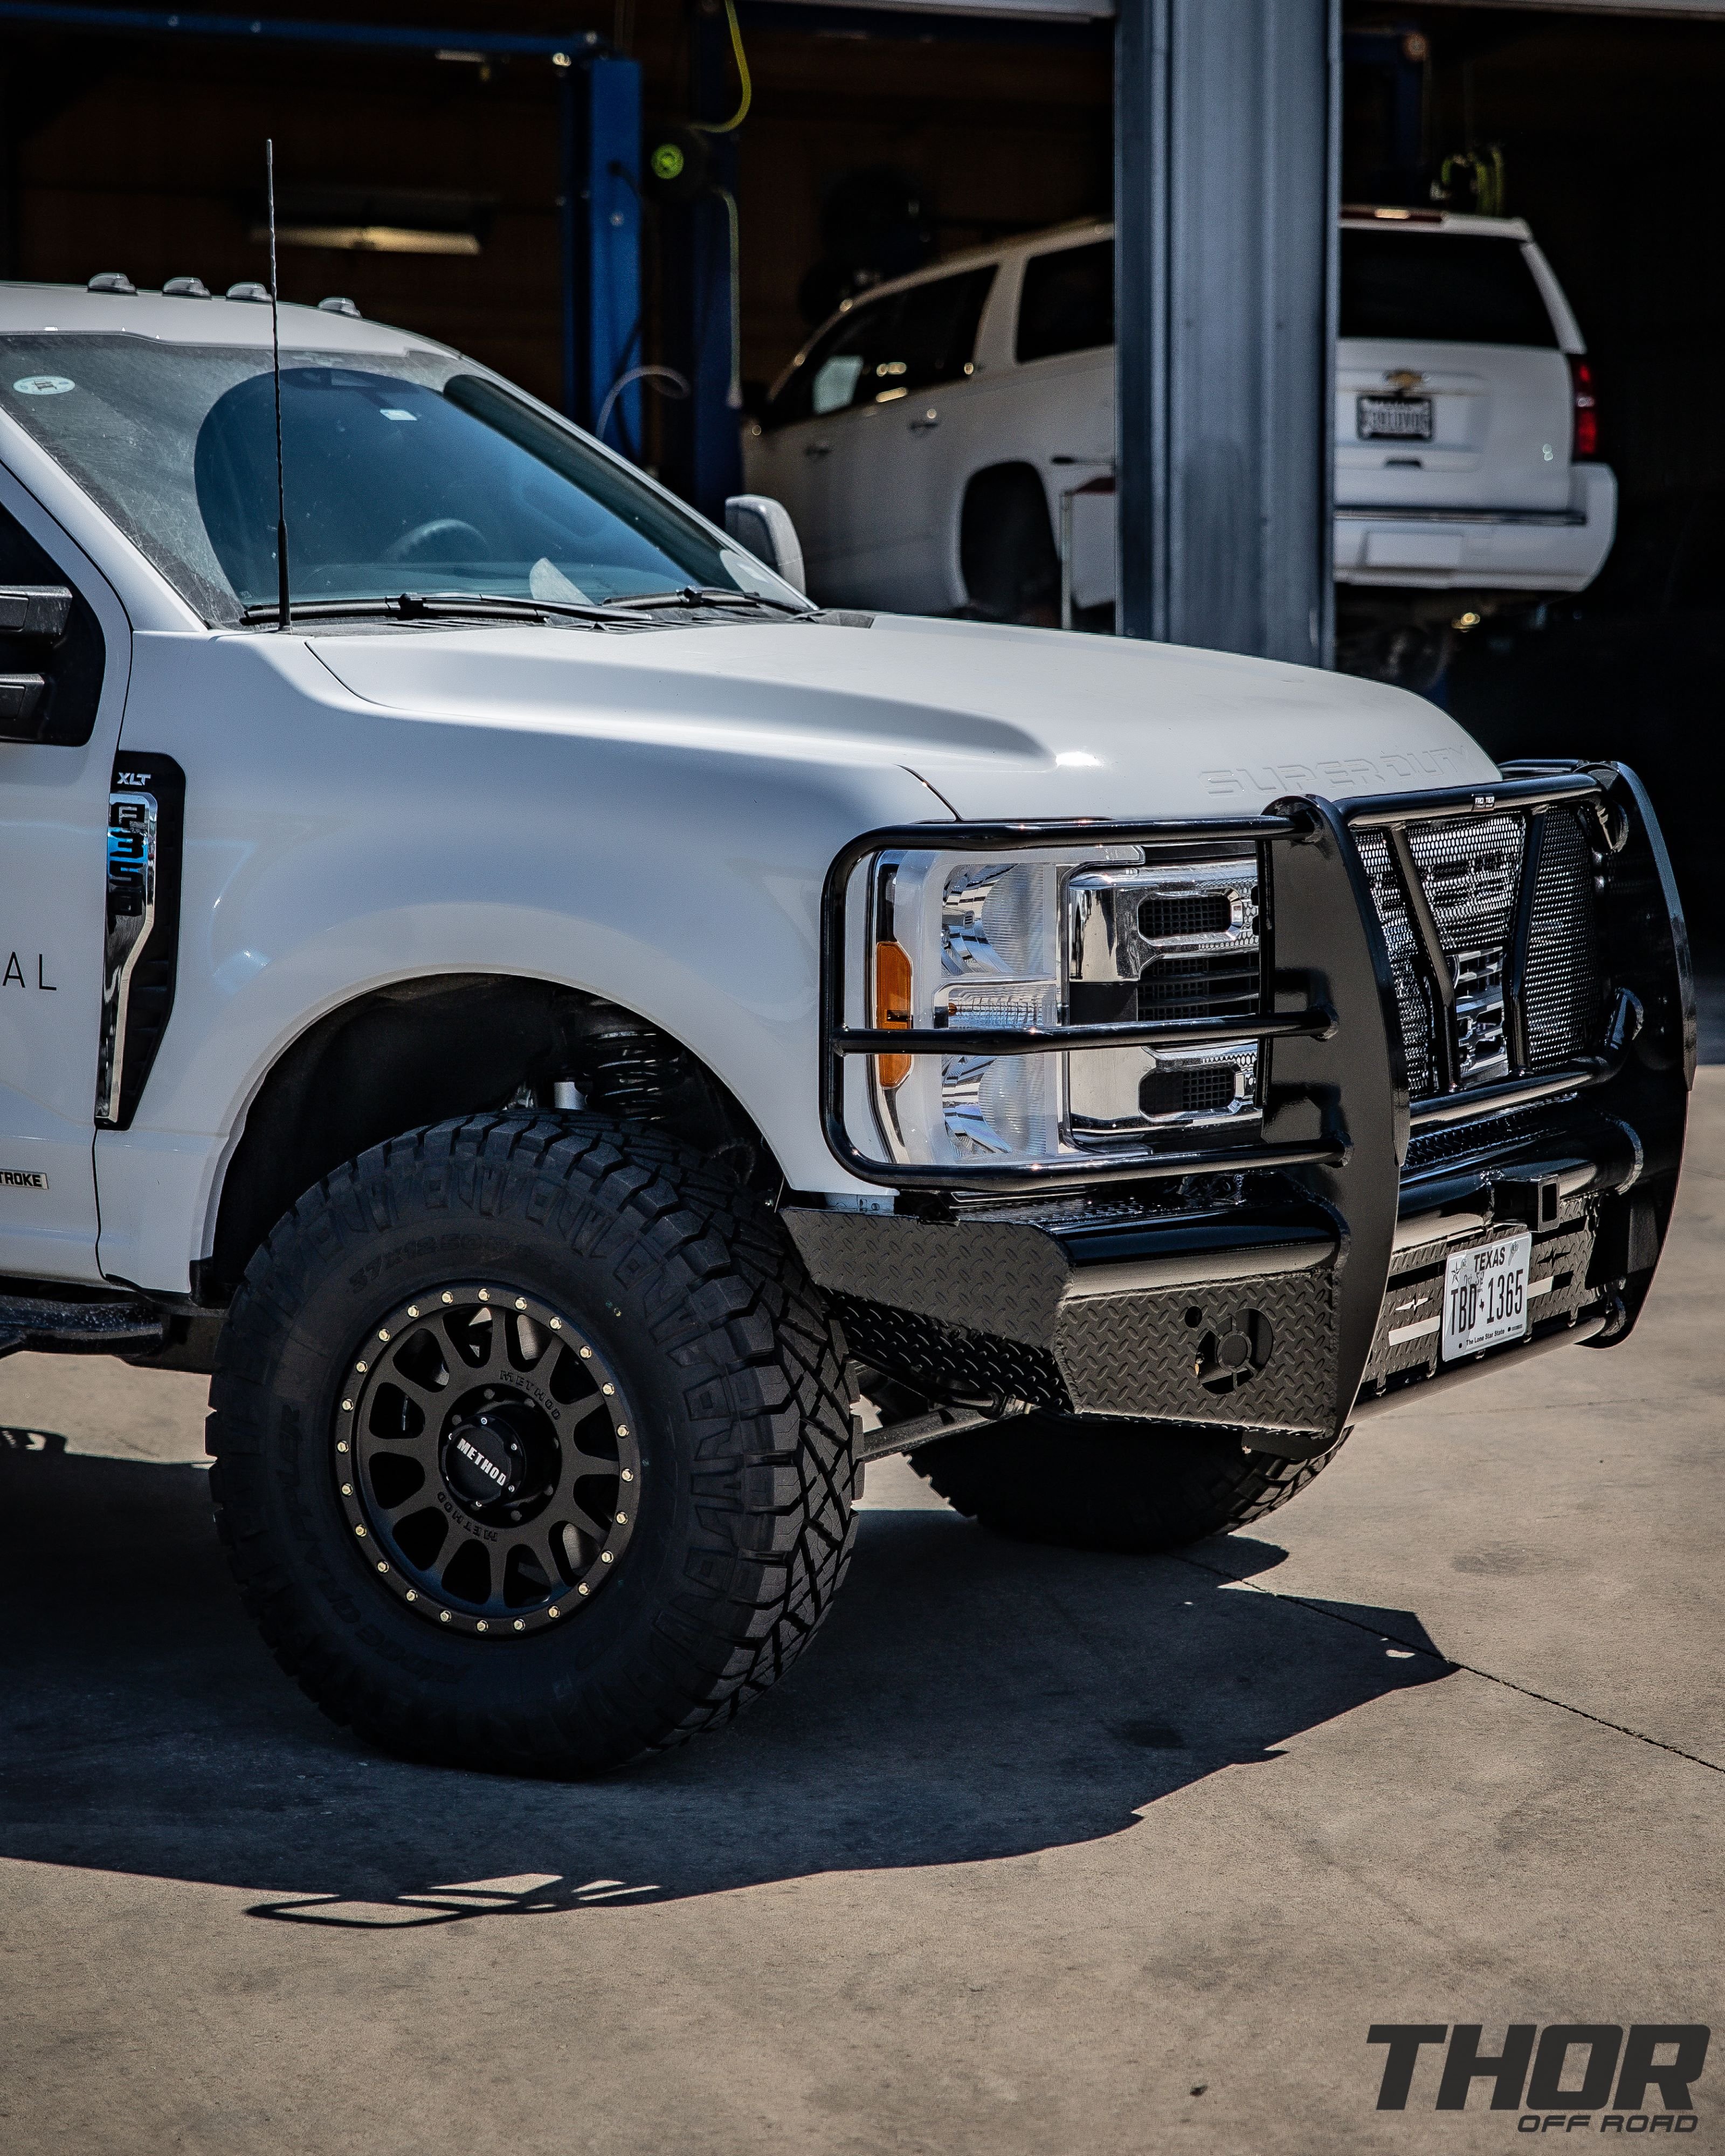 2023 Ford F-350 Super Duty XLT in White with Ready Lift 2.5" Leveling System, 18x9" Method 305 Matte Black Wheels, 35x12.50R18 Nitto Ridge Grappler Tires, Frontier Front Bumper, Air Lift LoadLifter 5000 Ultimate